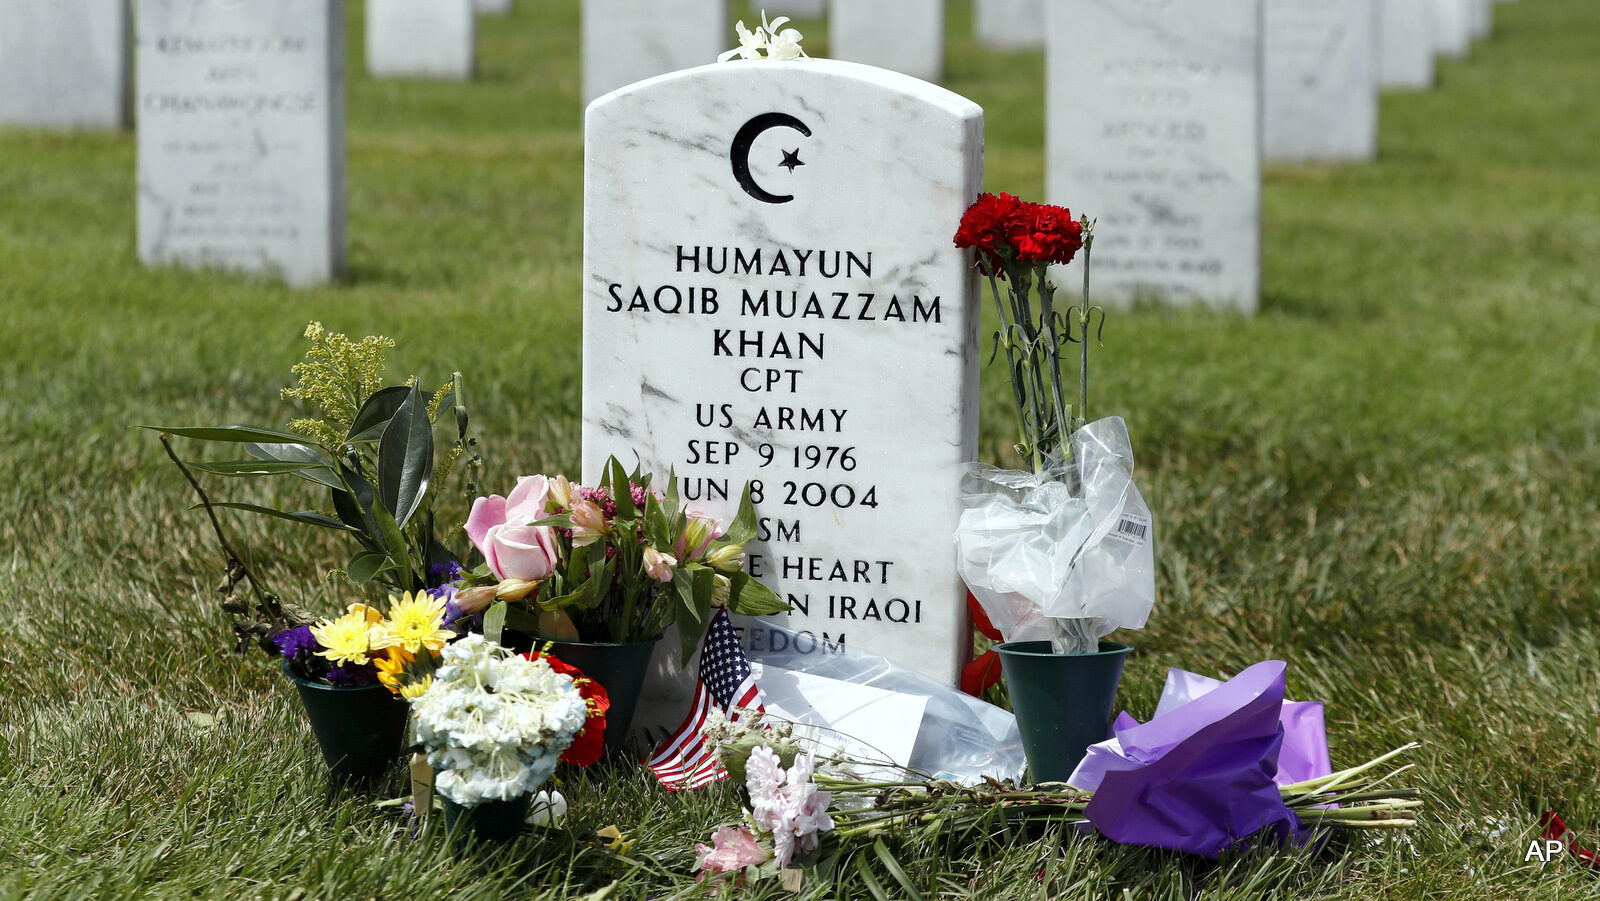 The tombstone of US Army Capt. Humayun S. M. Khan is seen in Section 60 at Arlington National Cemetery in Arlington, Va., Monday, Aug. 1, 2016. Fellow Republicans are joining the rising chorus of criticism of Donald Trump for his disparagement of the bereaved parents of U.S. Army Capt. Humayun Khan, a Muslim who was awarded a Bronze Star after he was killed in 2004 in Iraq.